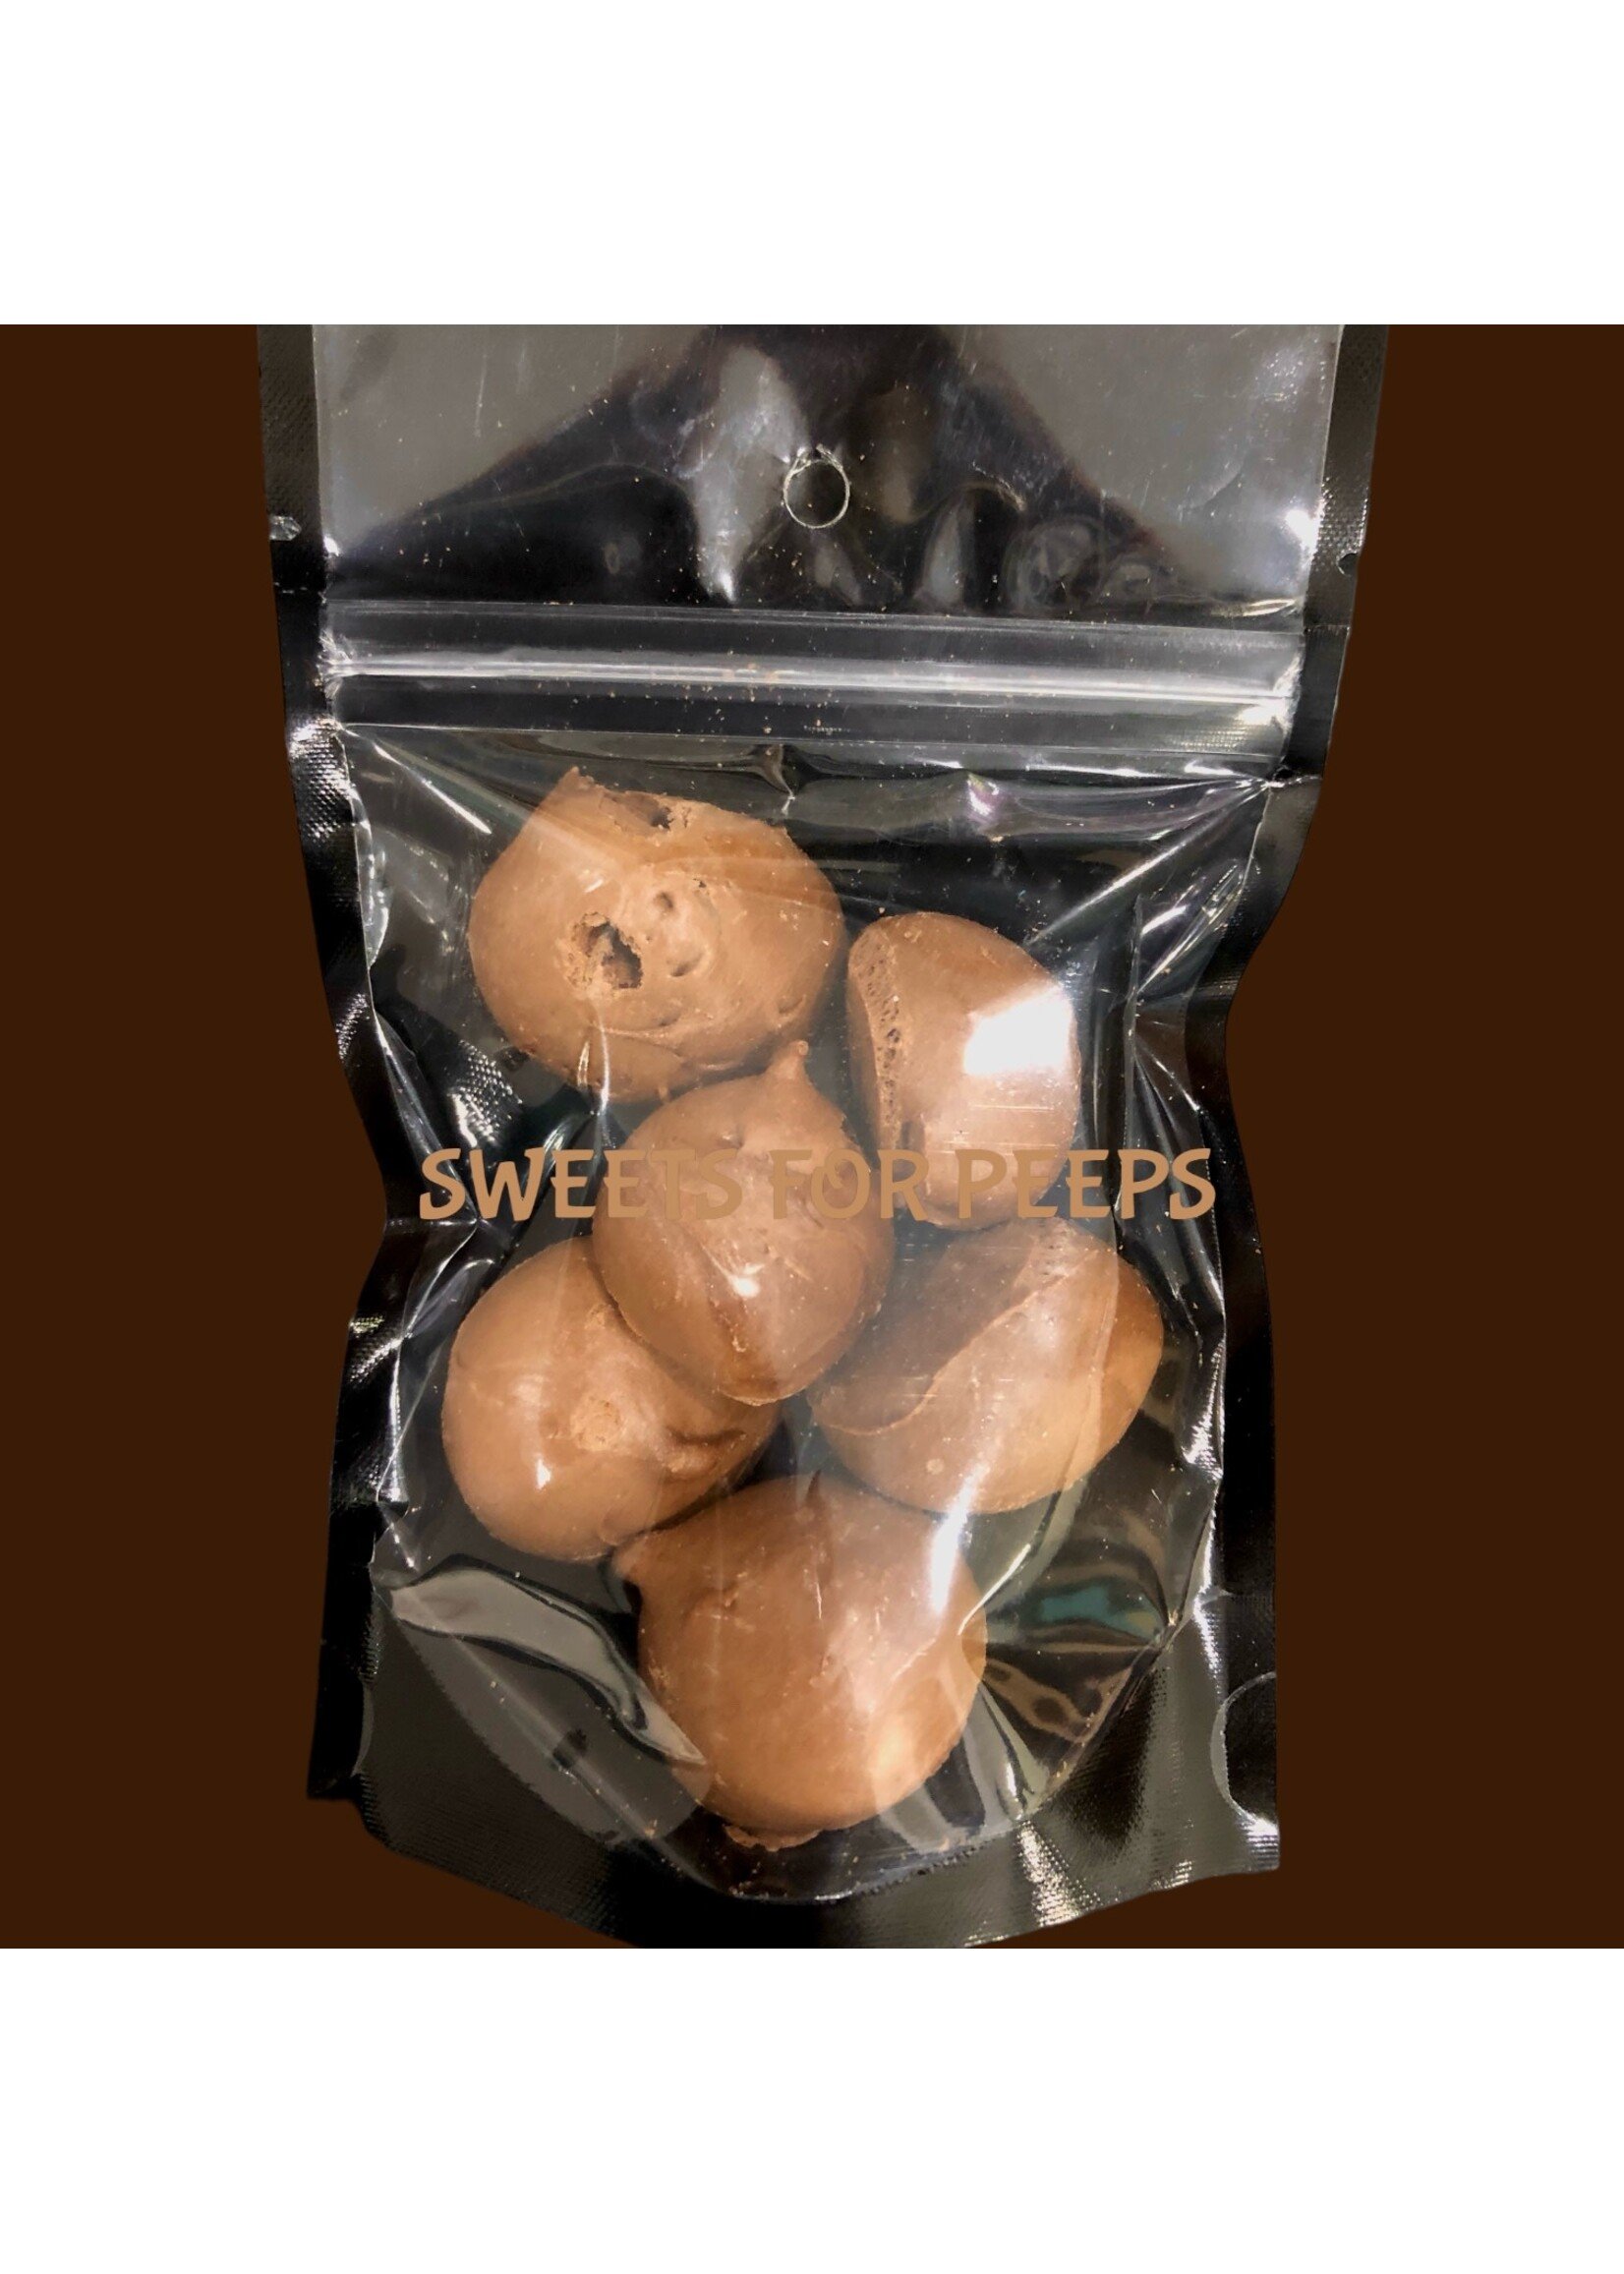 CND Freeze Dried Products Sweets for Peeps Freeze Dried Chocolate Mounds